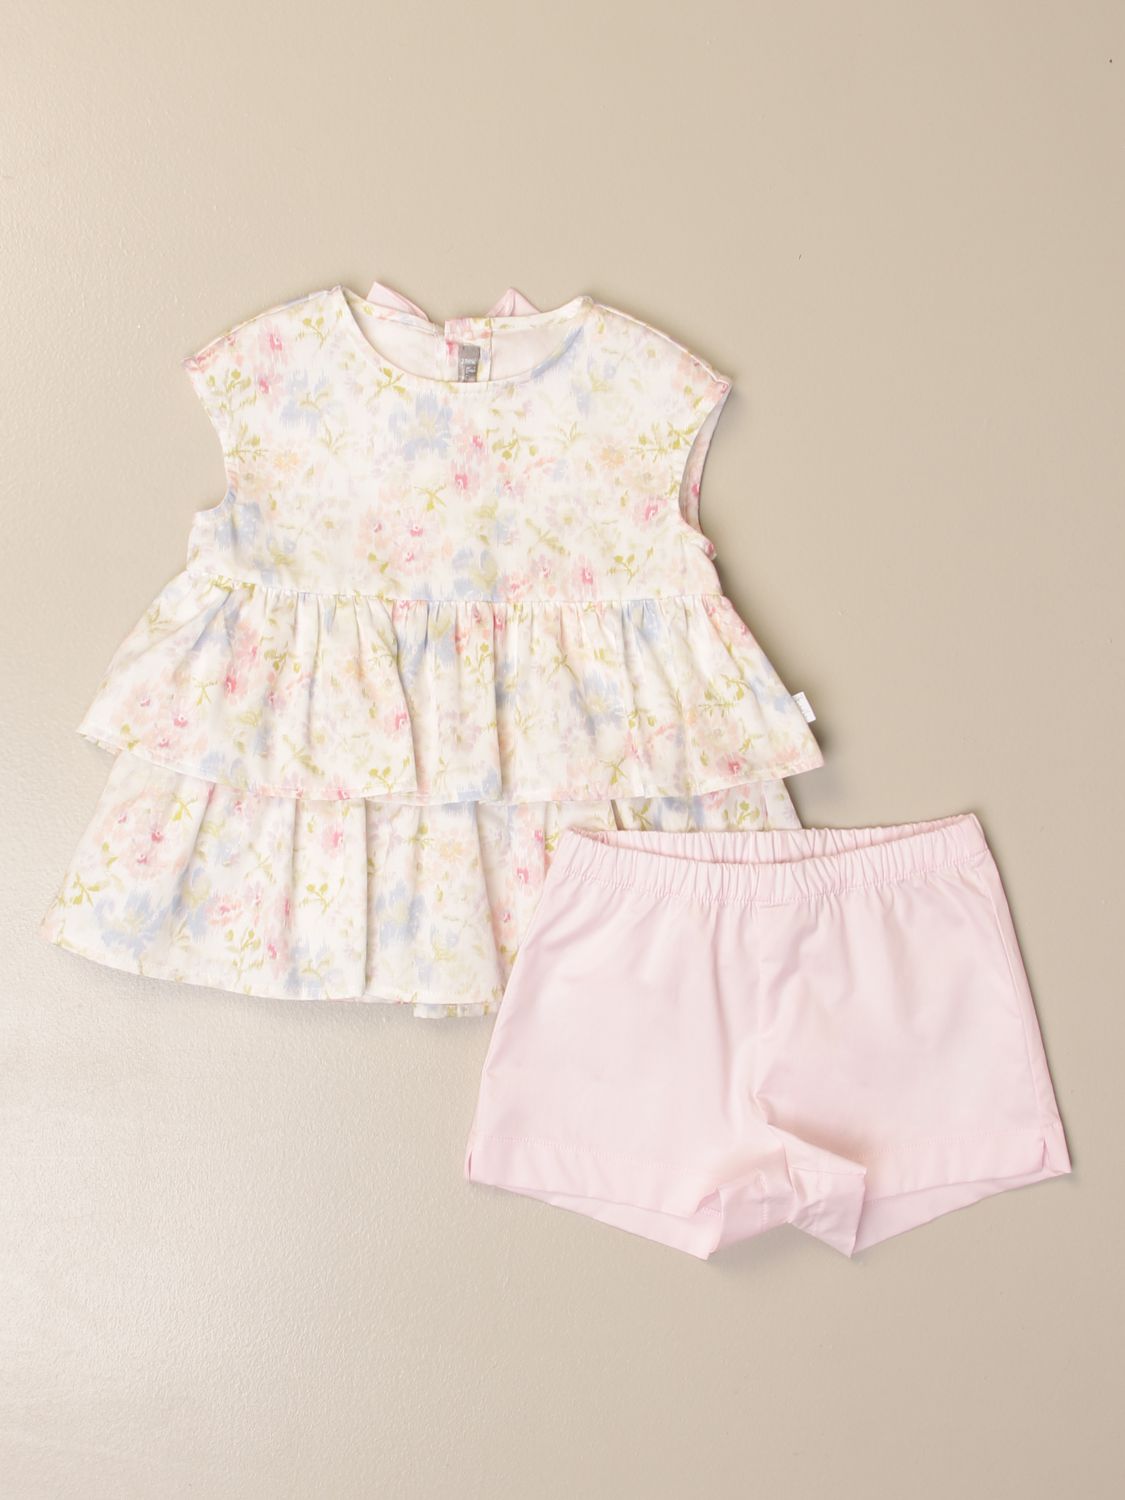 Co-ords Il Gufo: Il Gufo top + shorts patterned set pink 1